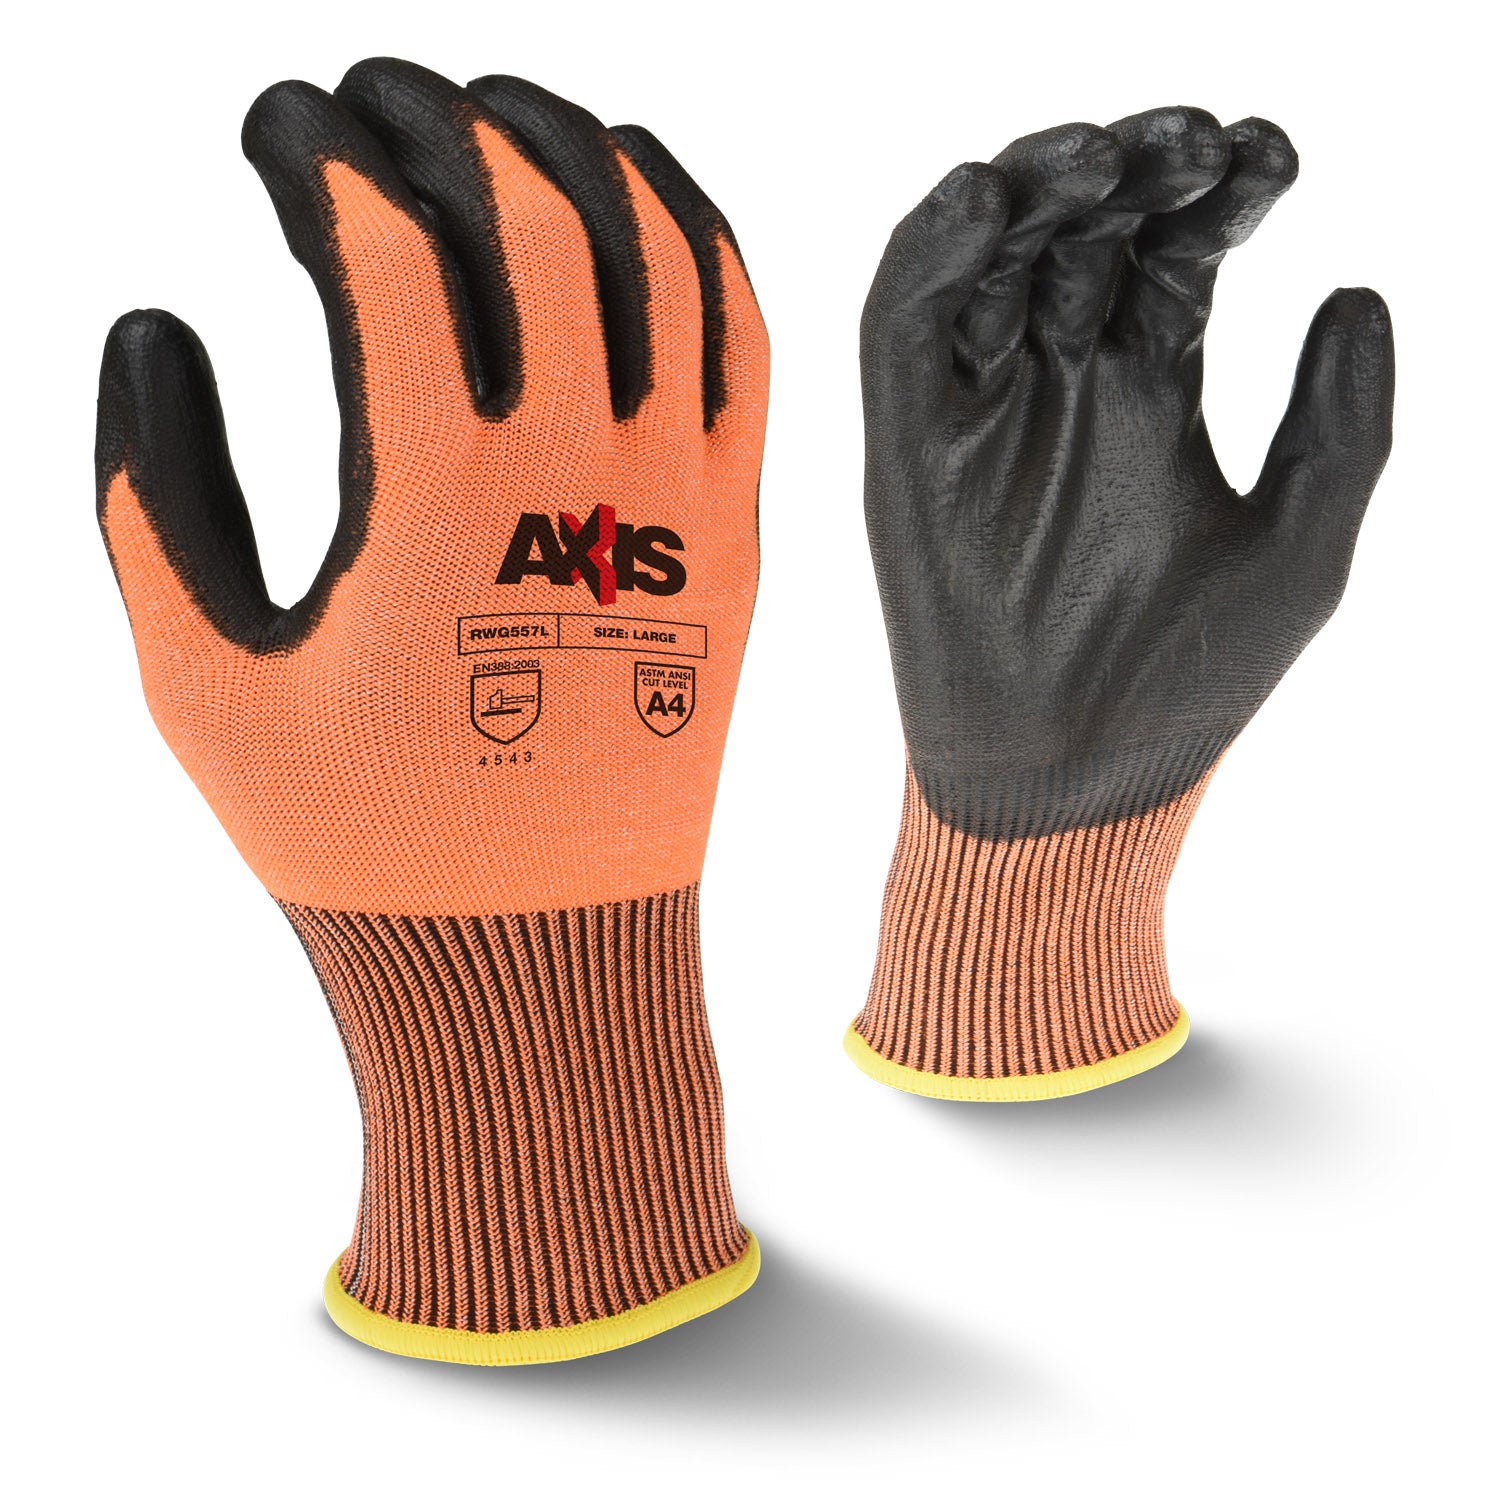 Radians RWG557 AXIS™ Cut Protection Level A4 High Tenacity Nylon Glove -eSafety Supplies, Inc